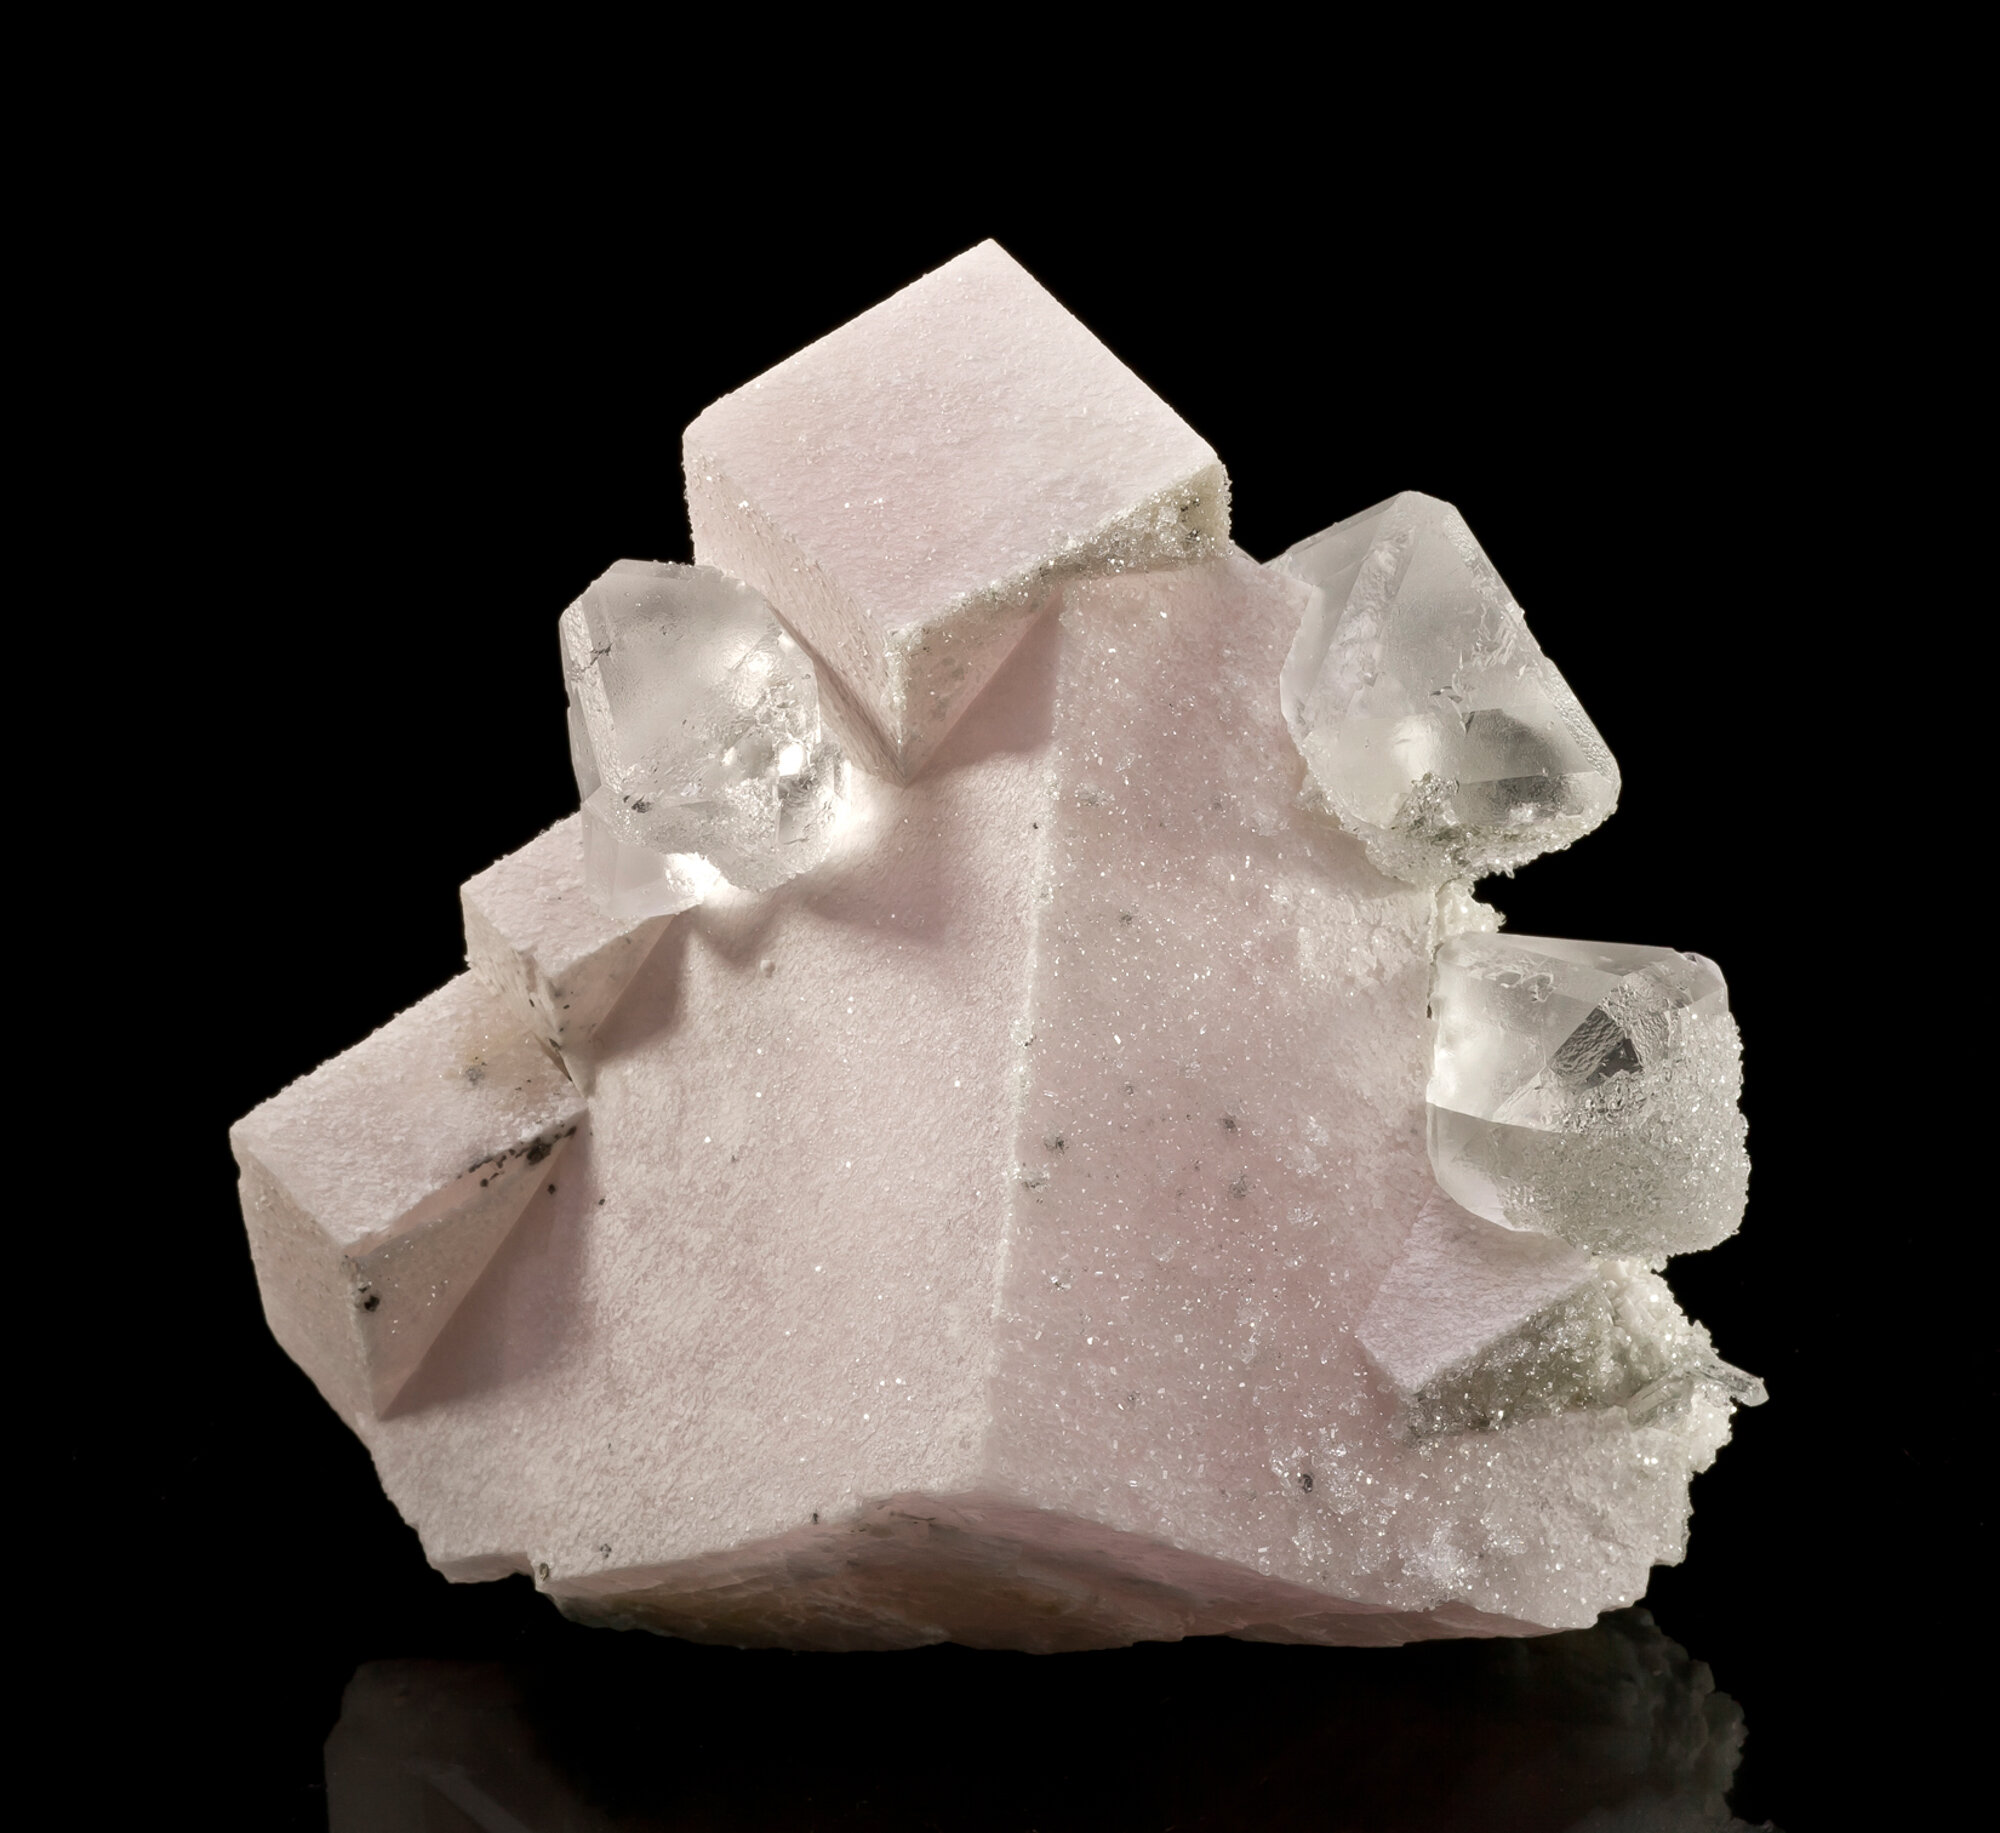  Twinned calcite with colorless fluorite, 12.7 cm, from Huanggangmine No. 5, Keshiketeng County, Chifeng Prefecture, Inner Mongolia Autonomous Region, China. Found in 2012. 